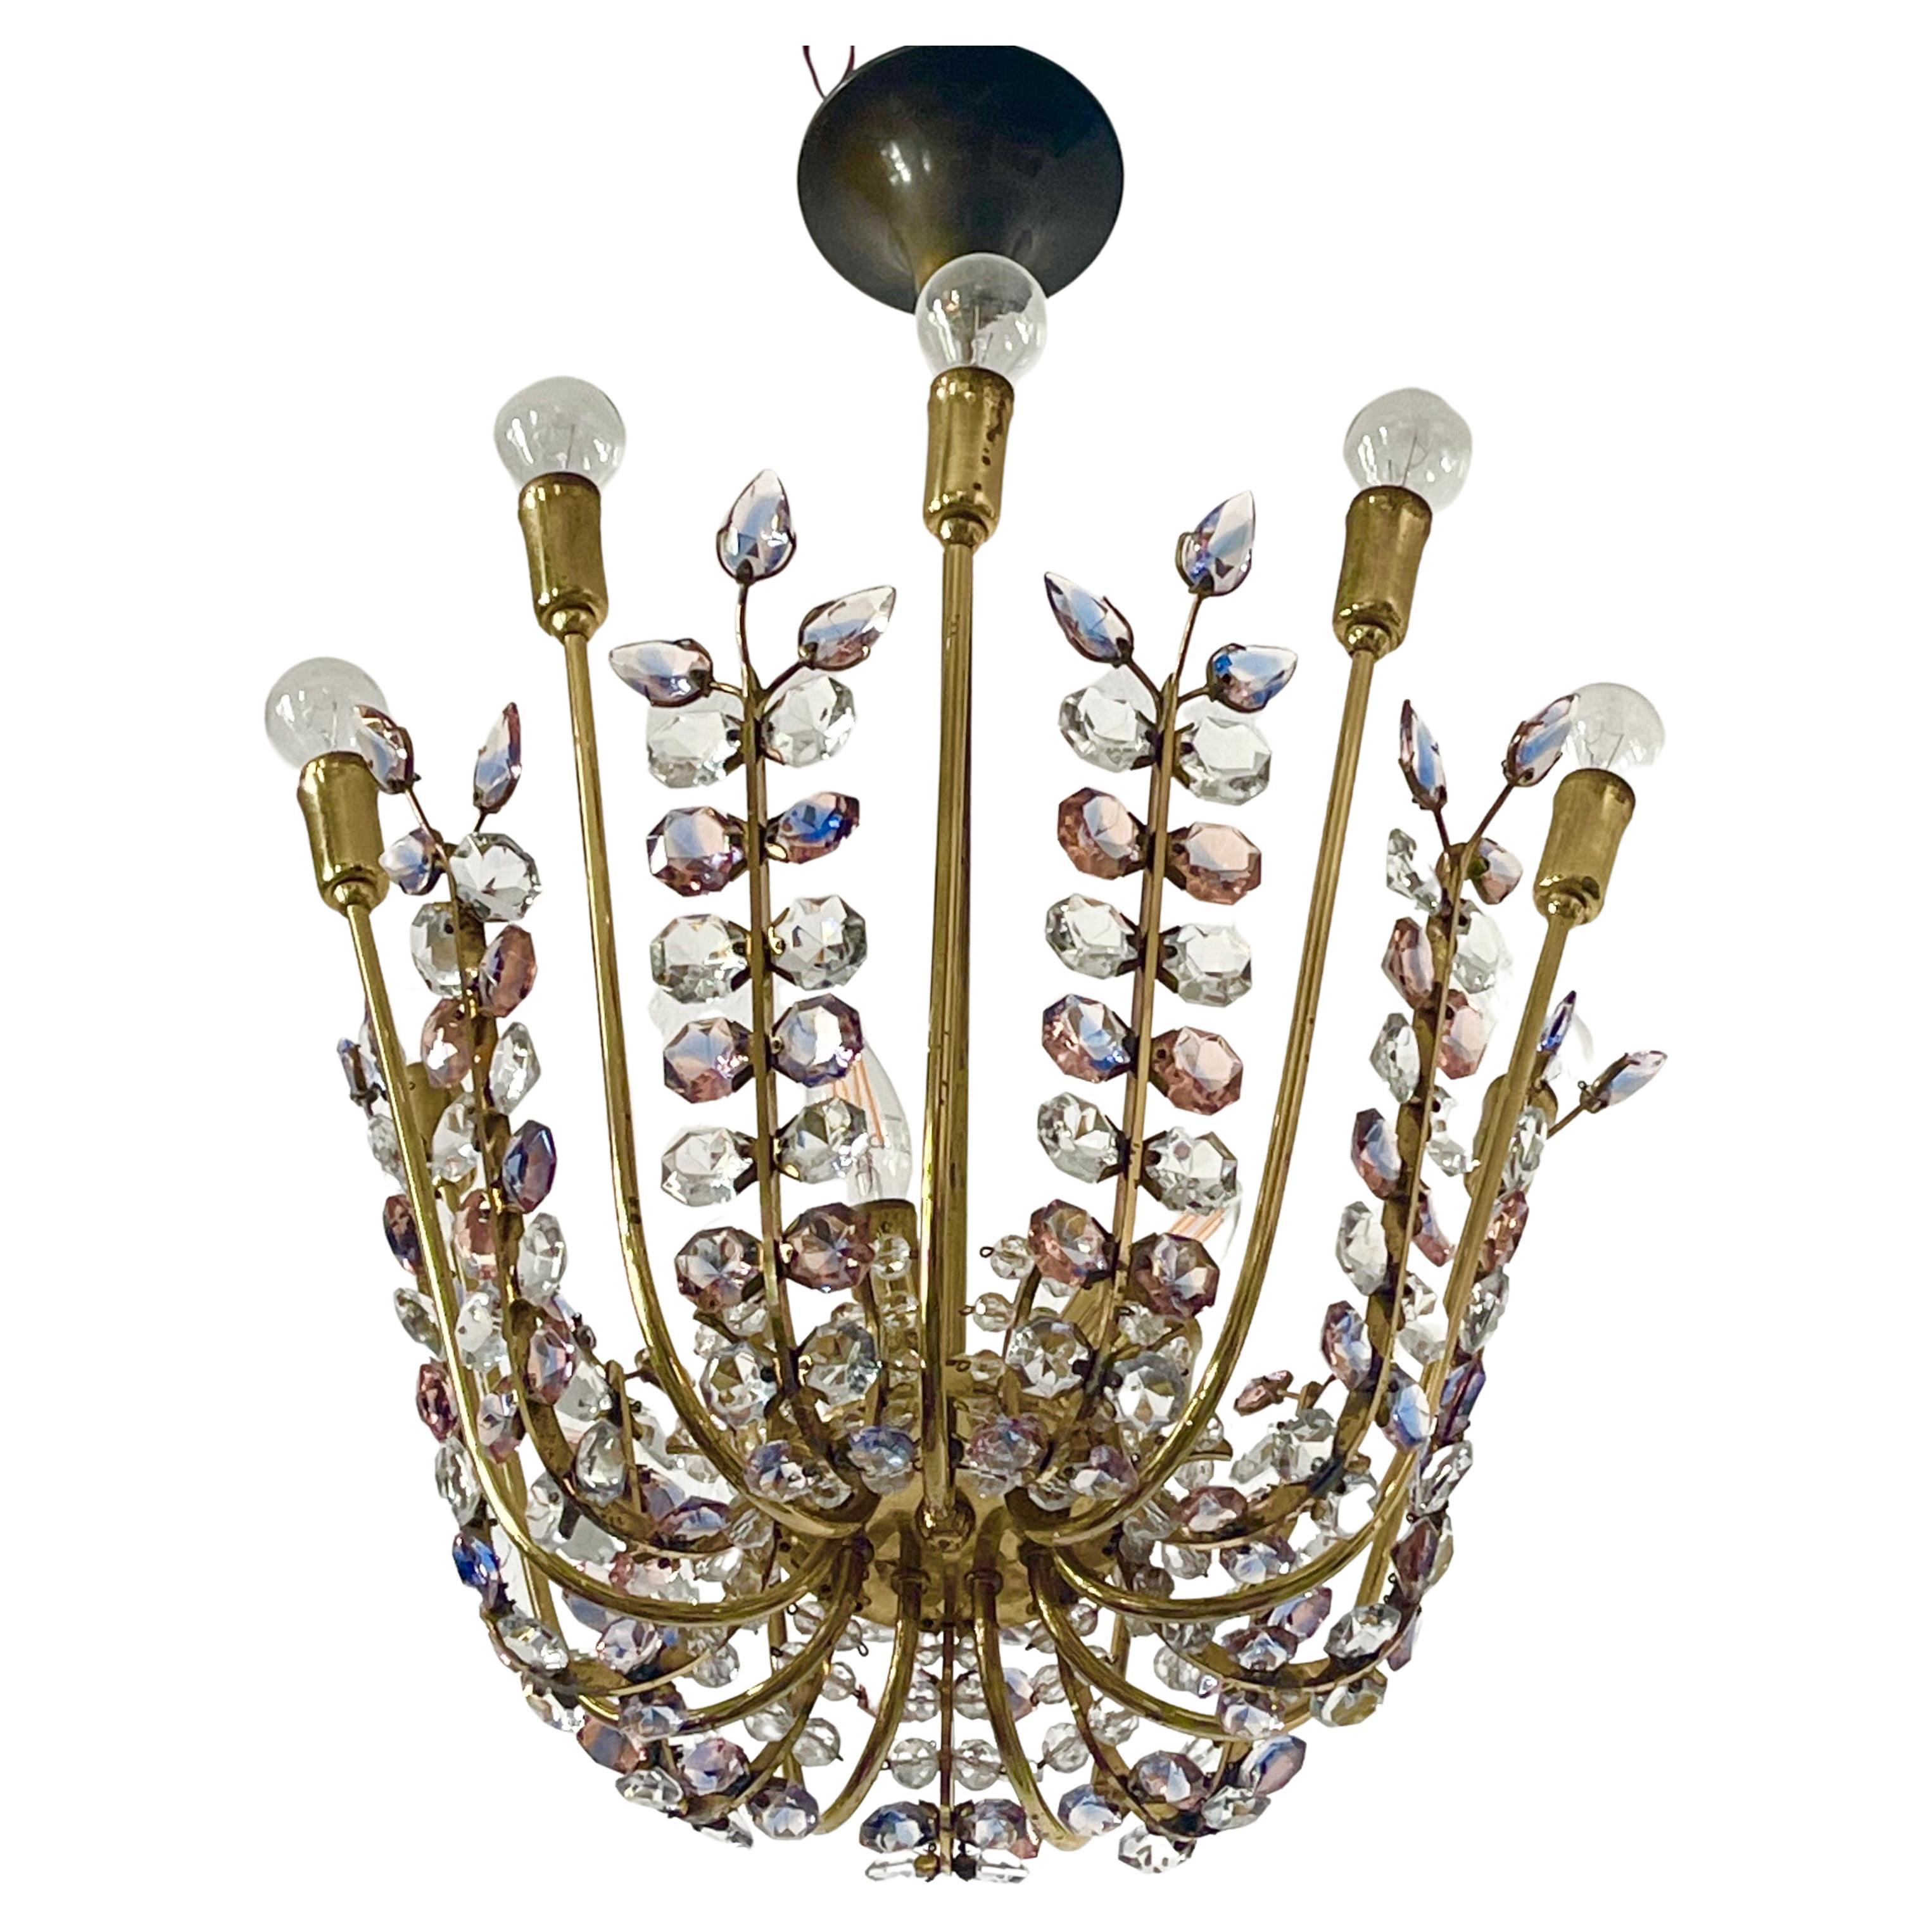 Rare midcentury cut glass and gilt brass nine -arms and chandelier designed by Oswald Haerdtl for Bakalowits & Sohne, Austria, Vienna, circa 1950s.
Socket: 12 x e14 for standard screw bulbs.
In a very good original condition.

